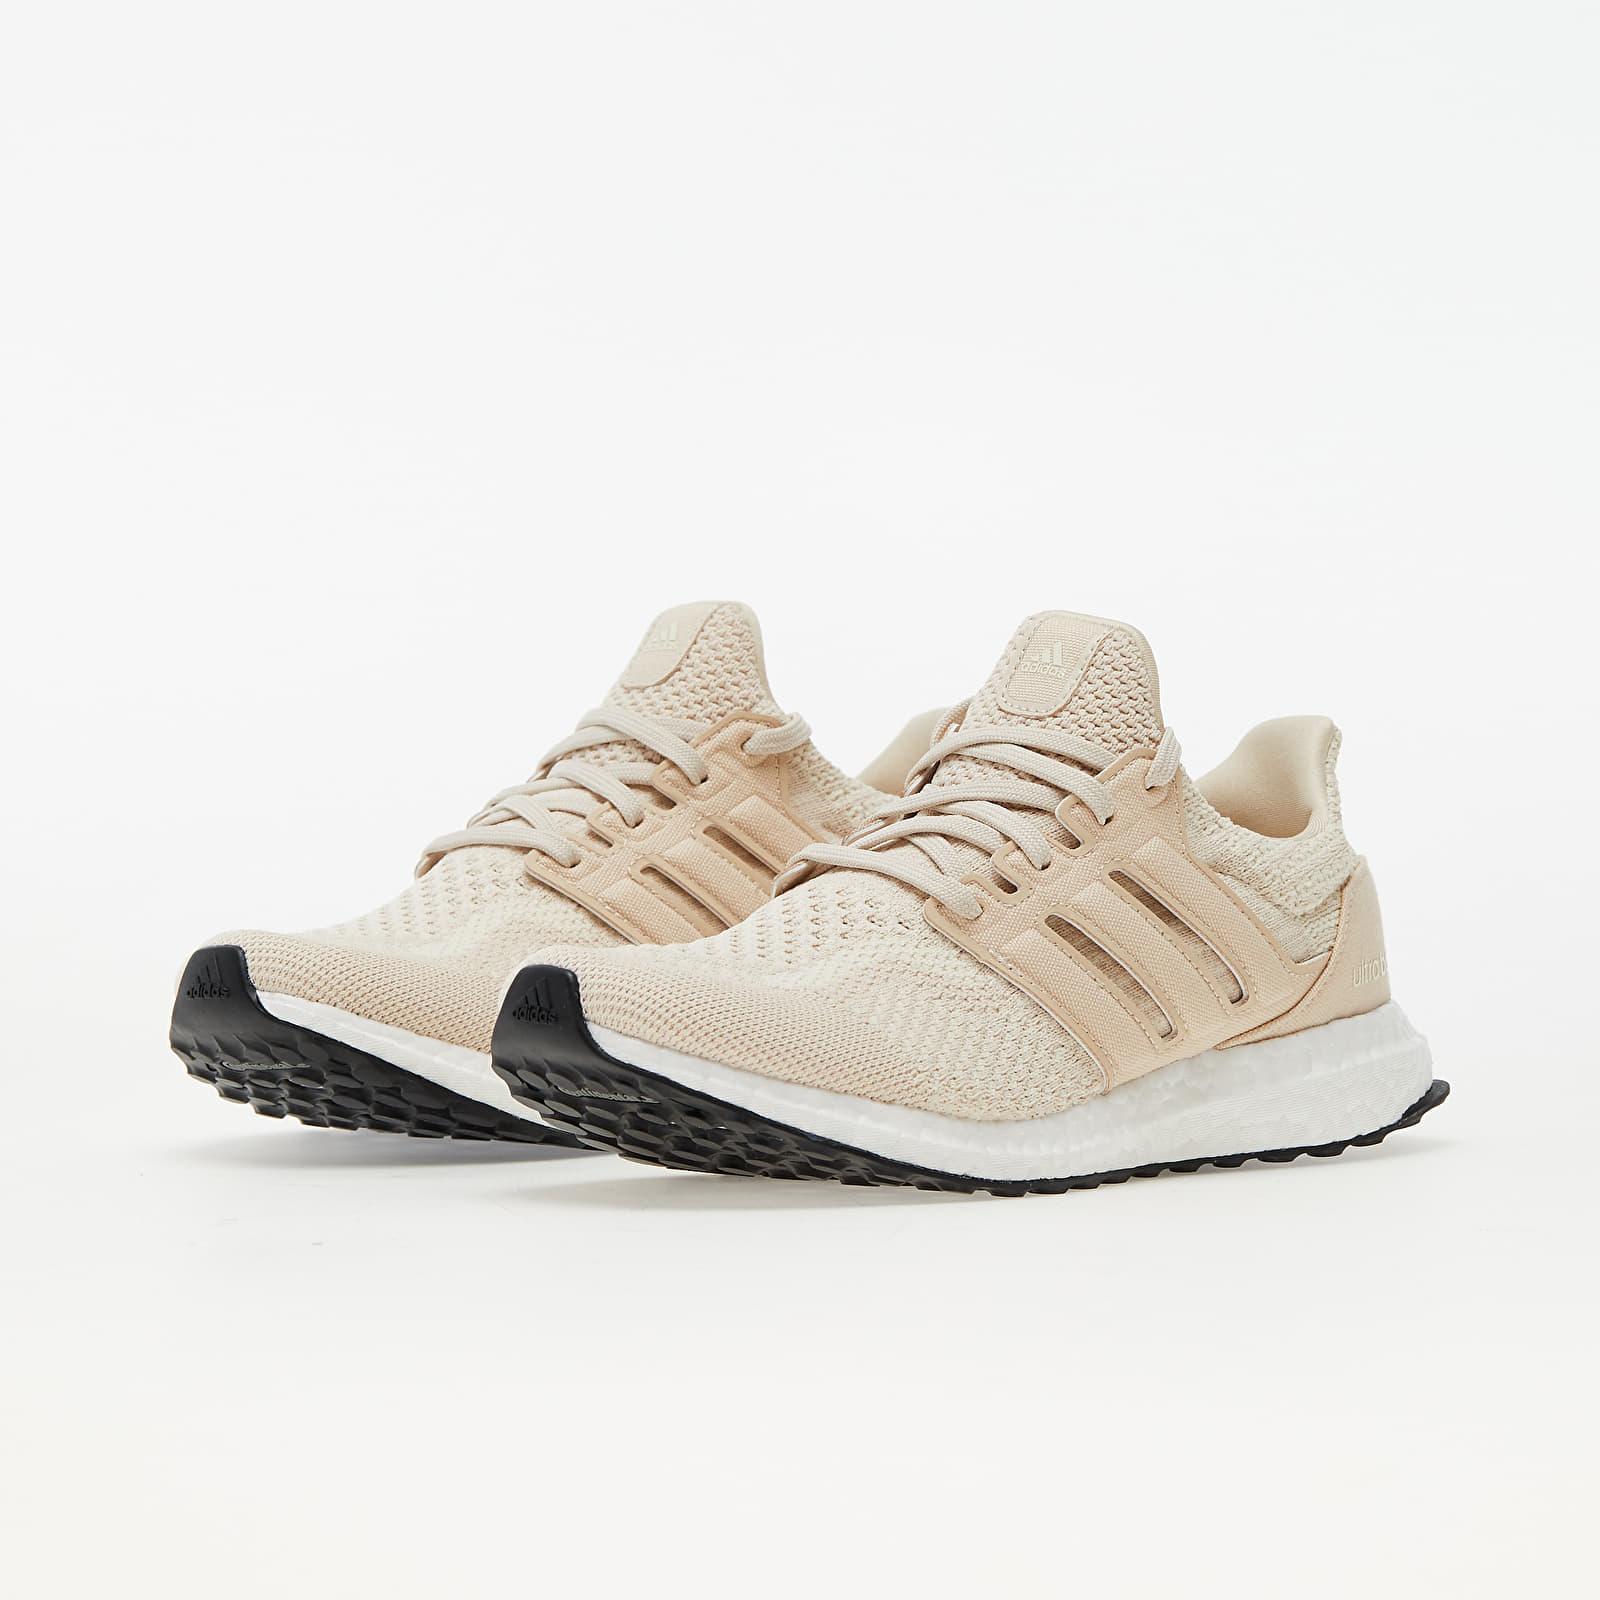 adidas Originals Adidas Ultraboost 5.0 Dna Halo Ivory/ Halo Ivory/ Core  White in Natural | Lyst